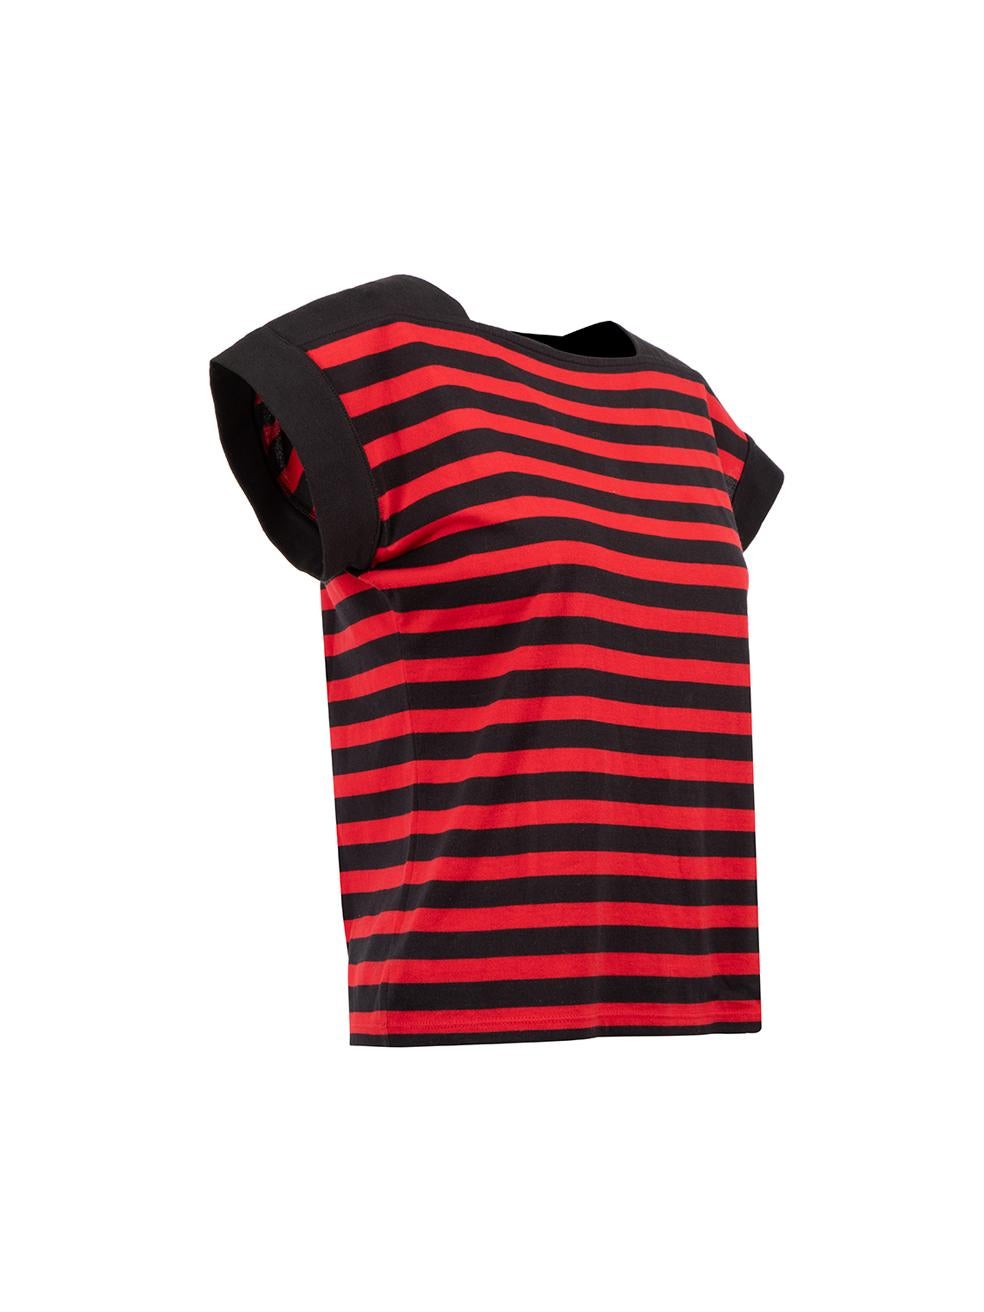 CONDITION is Very good. Hardly any visible wear to top is evident on this used Céline designer resale item. 



Details


Red and black

Cotton

Short sleeves top

Striped pattern

Square neckline





Made in Japan



Composition

100%